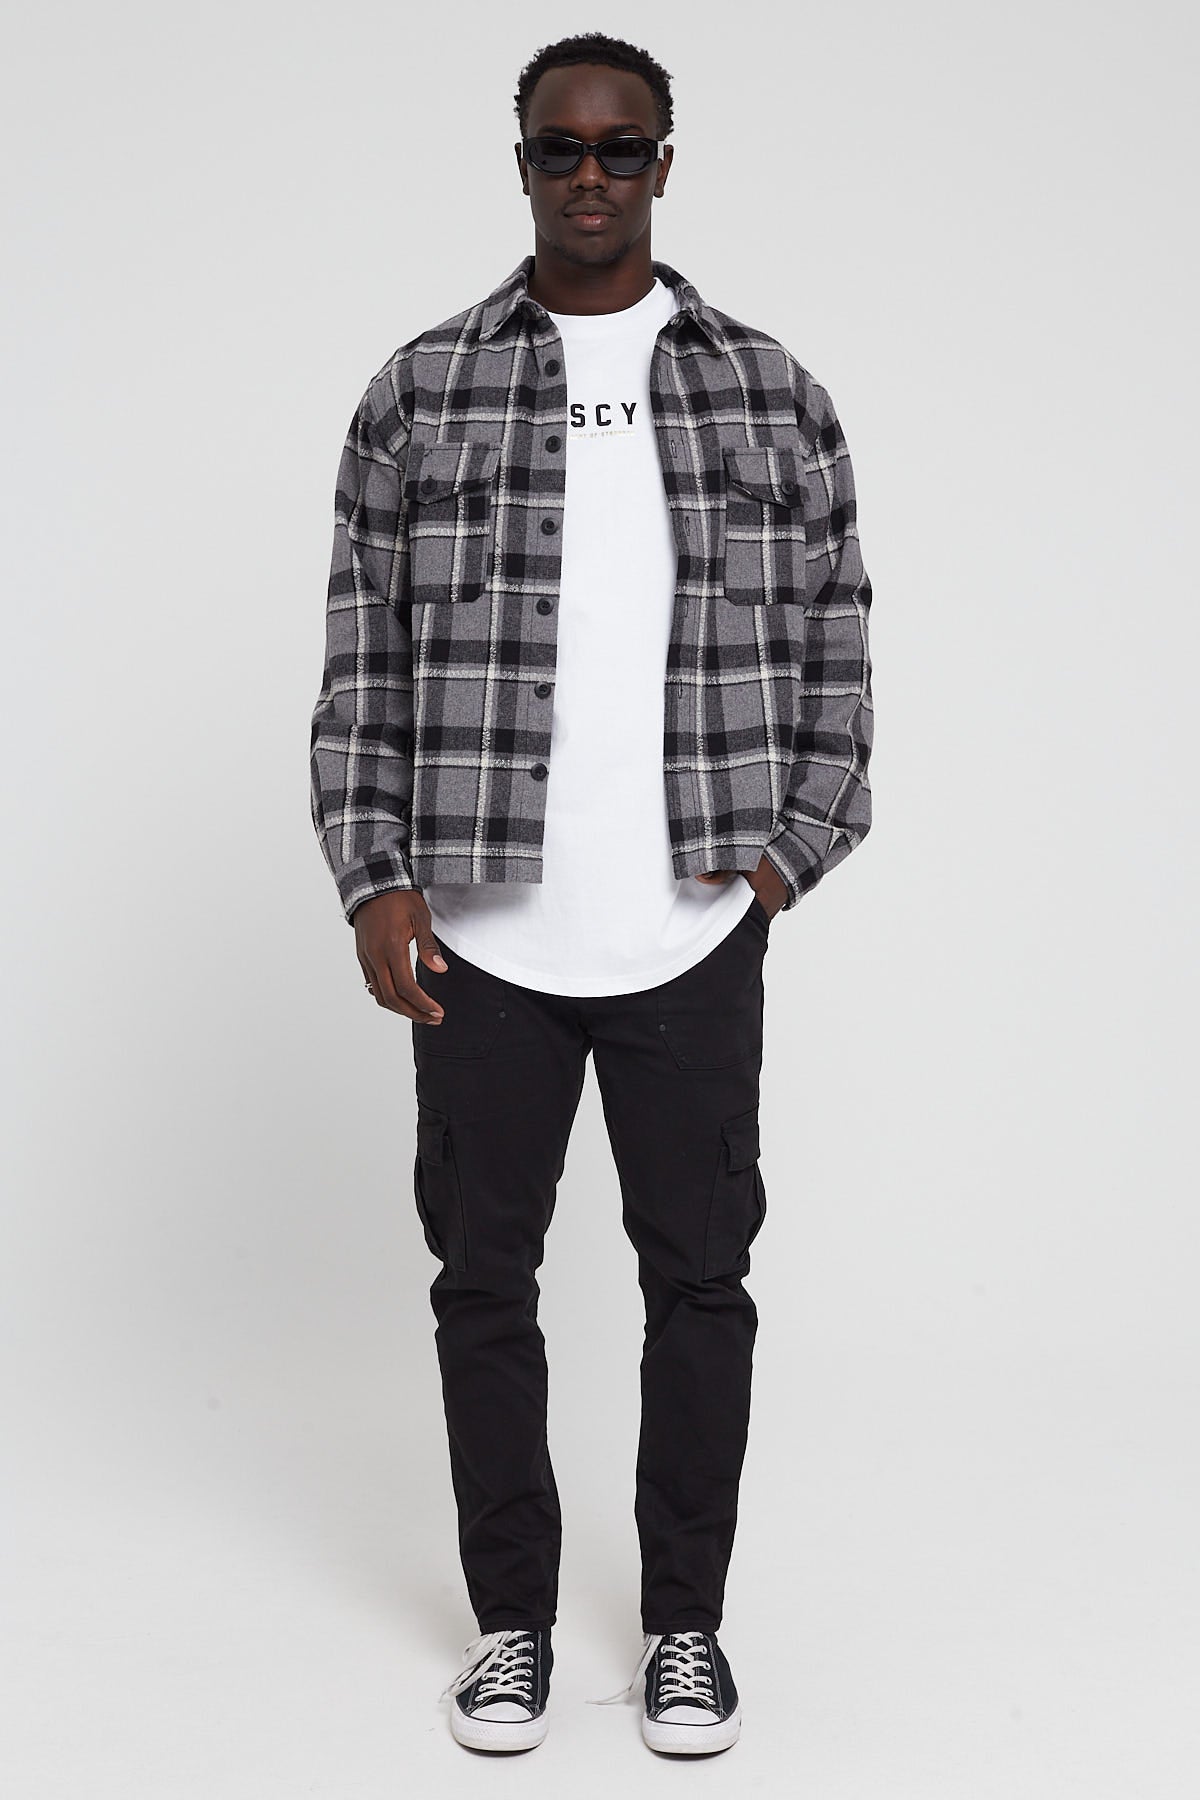 Kiss Chacey Ruskin Relaxed Overshirt Charcoal Check